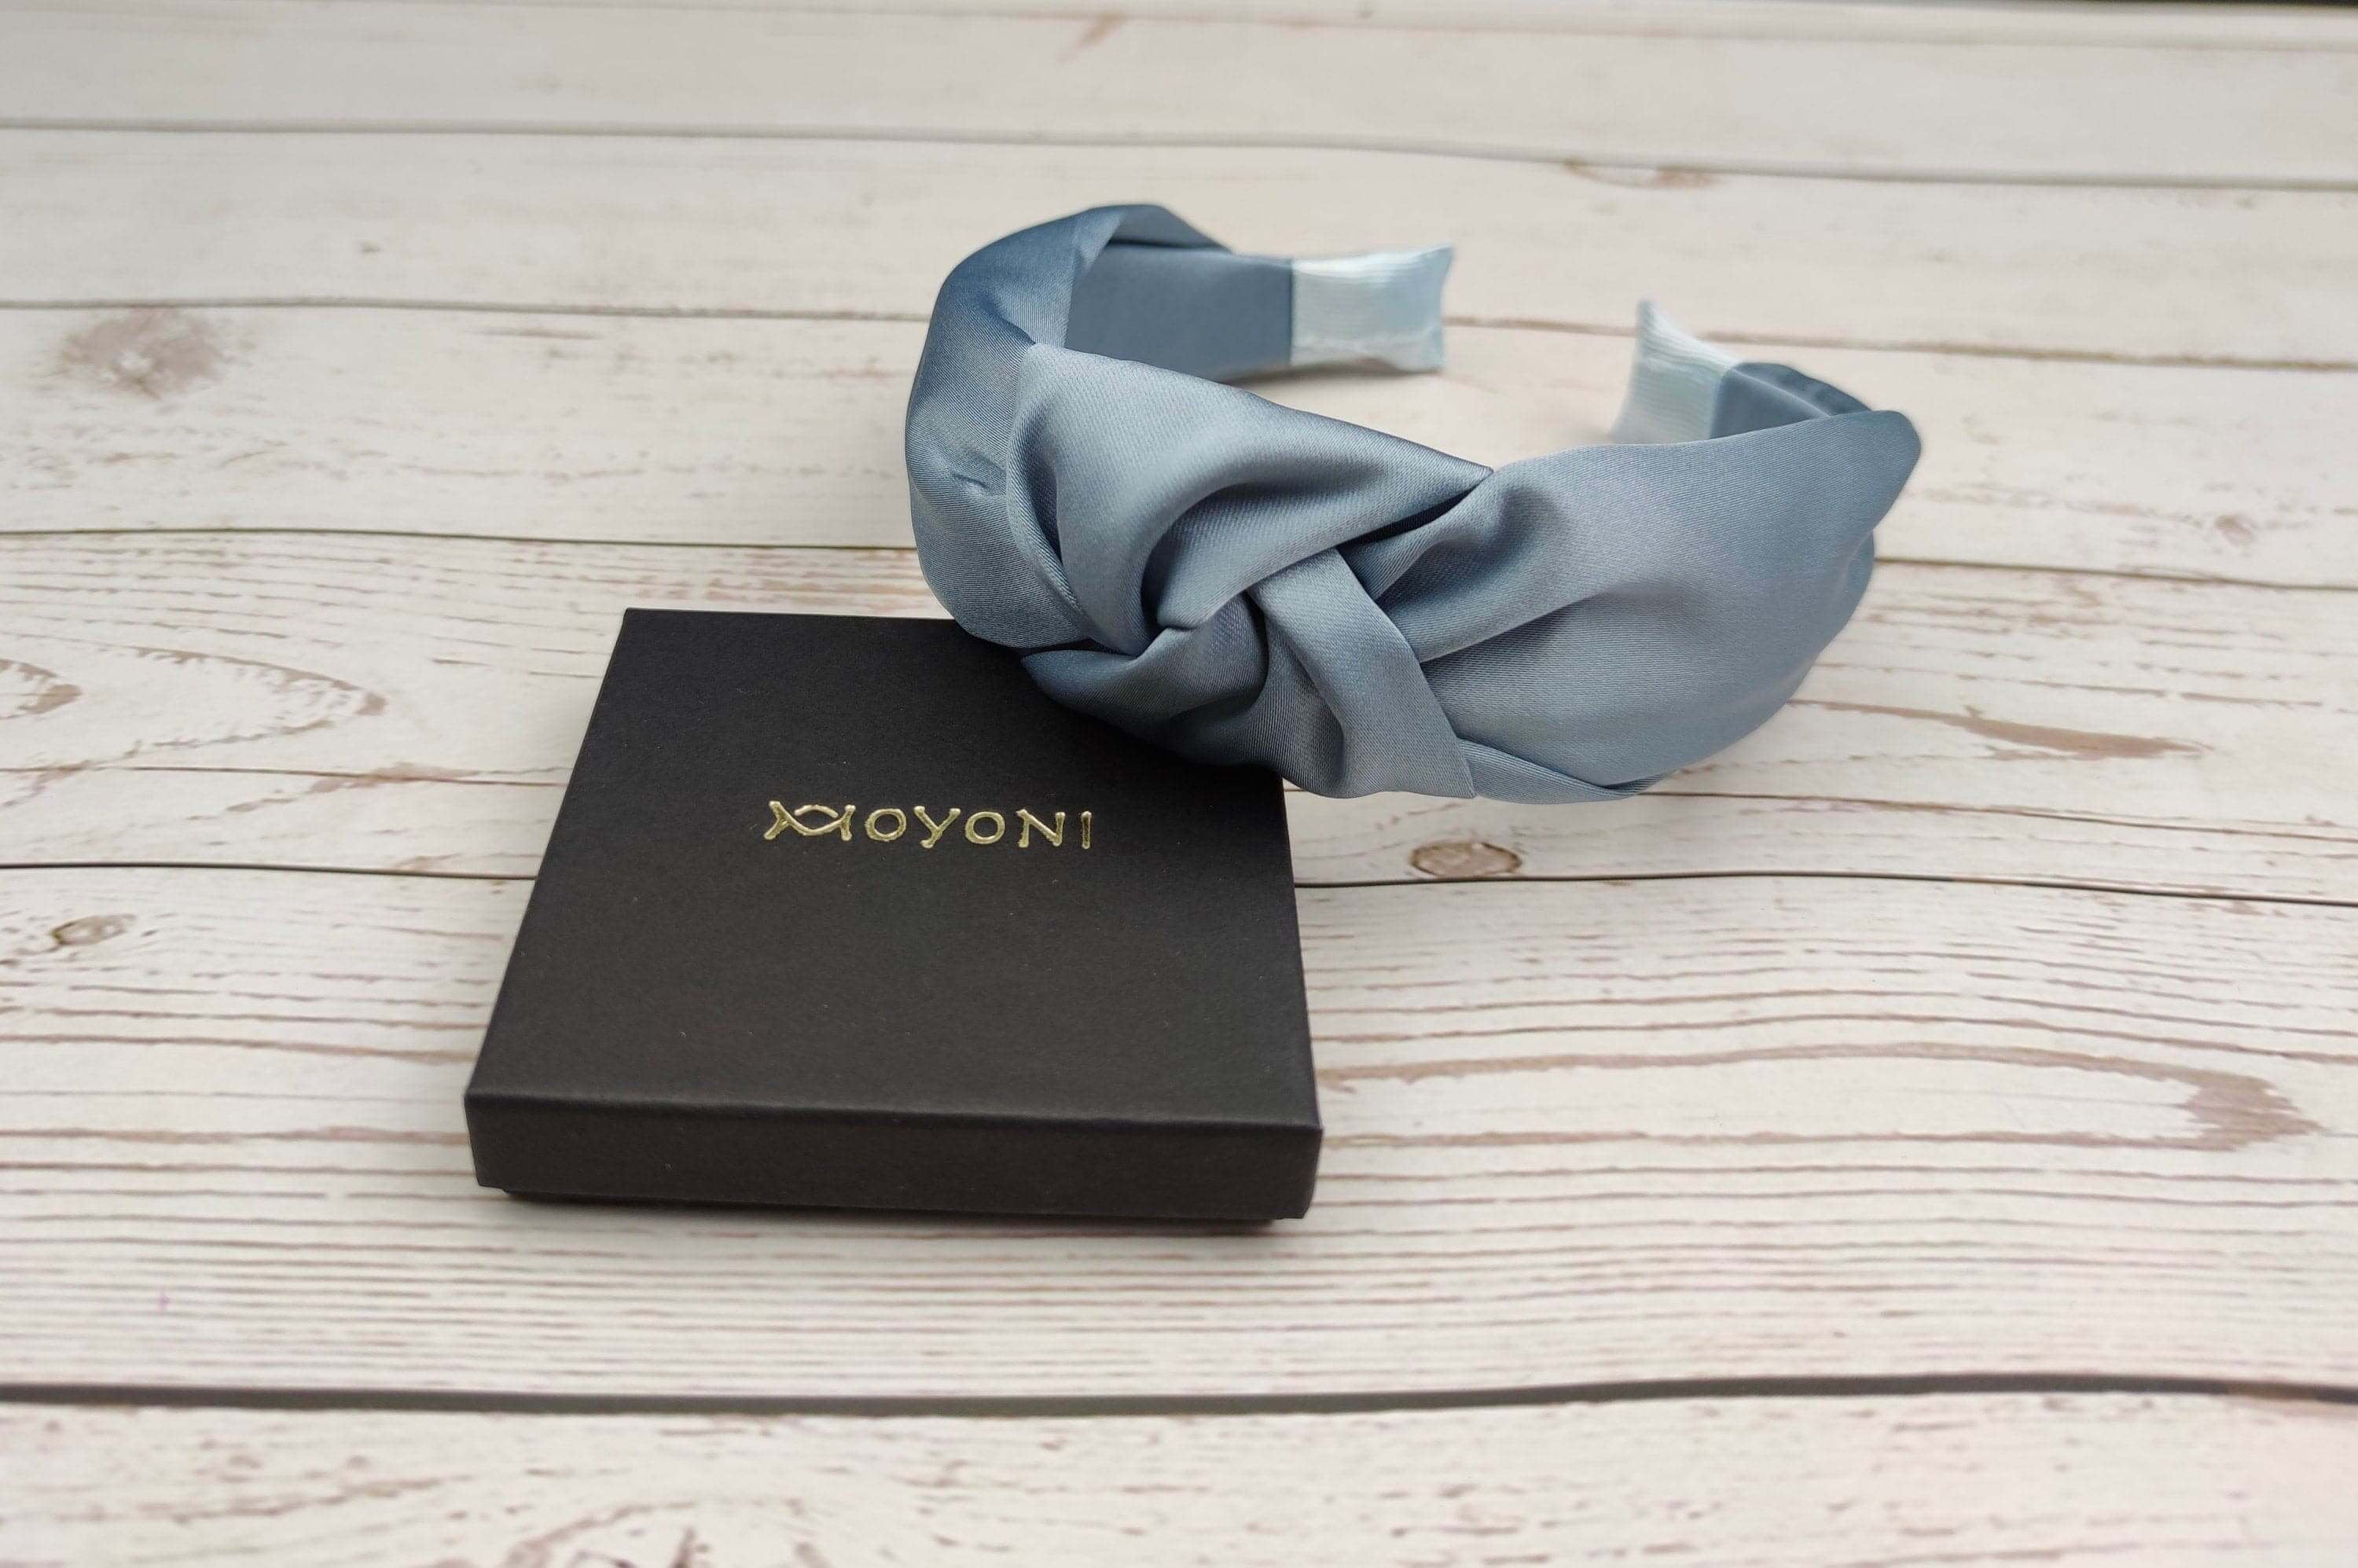 Add a pop of color to your hairstyle with this baby blue twist knot headband - a fashionable accessory for women.